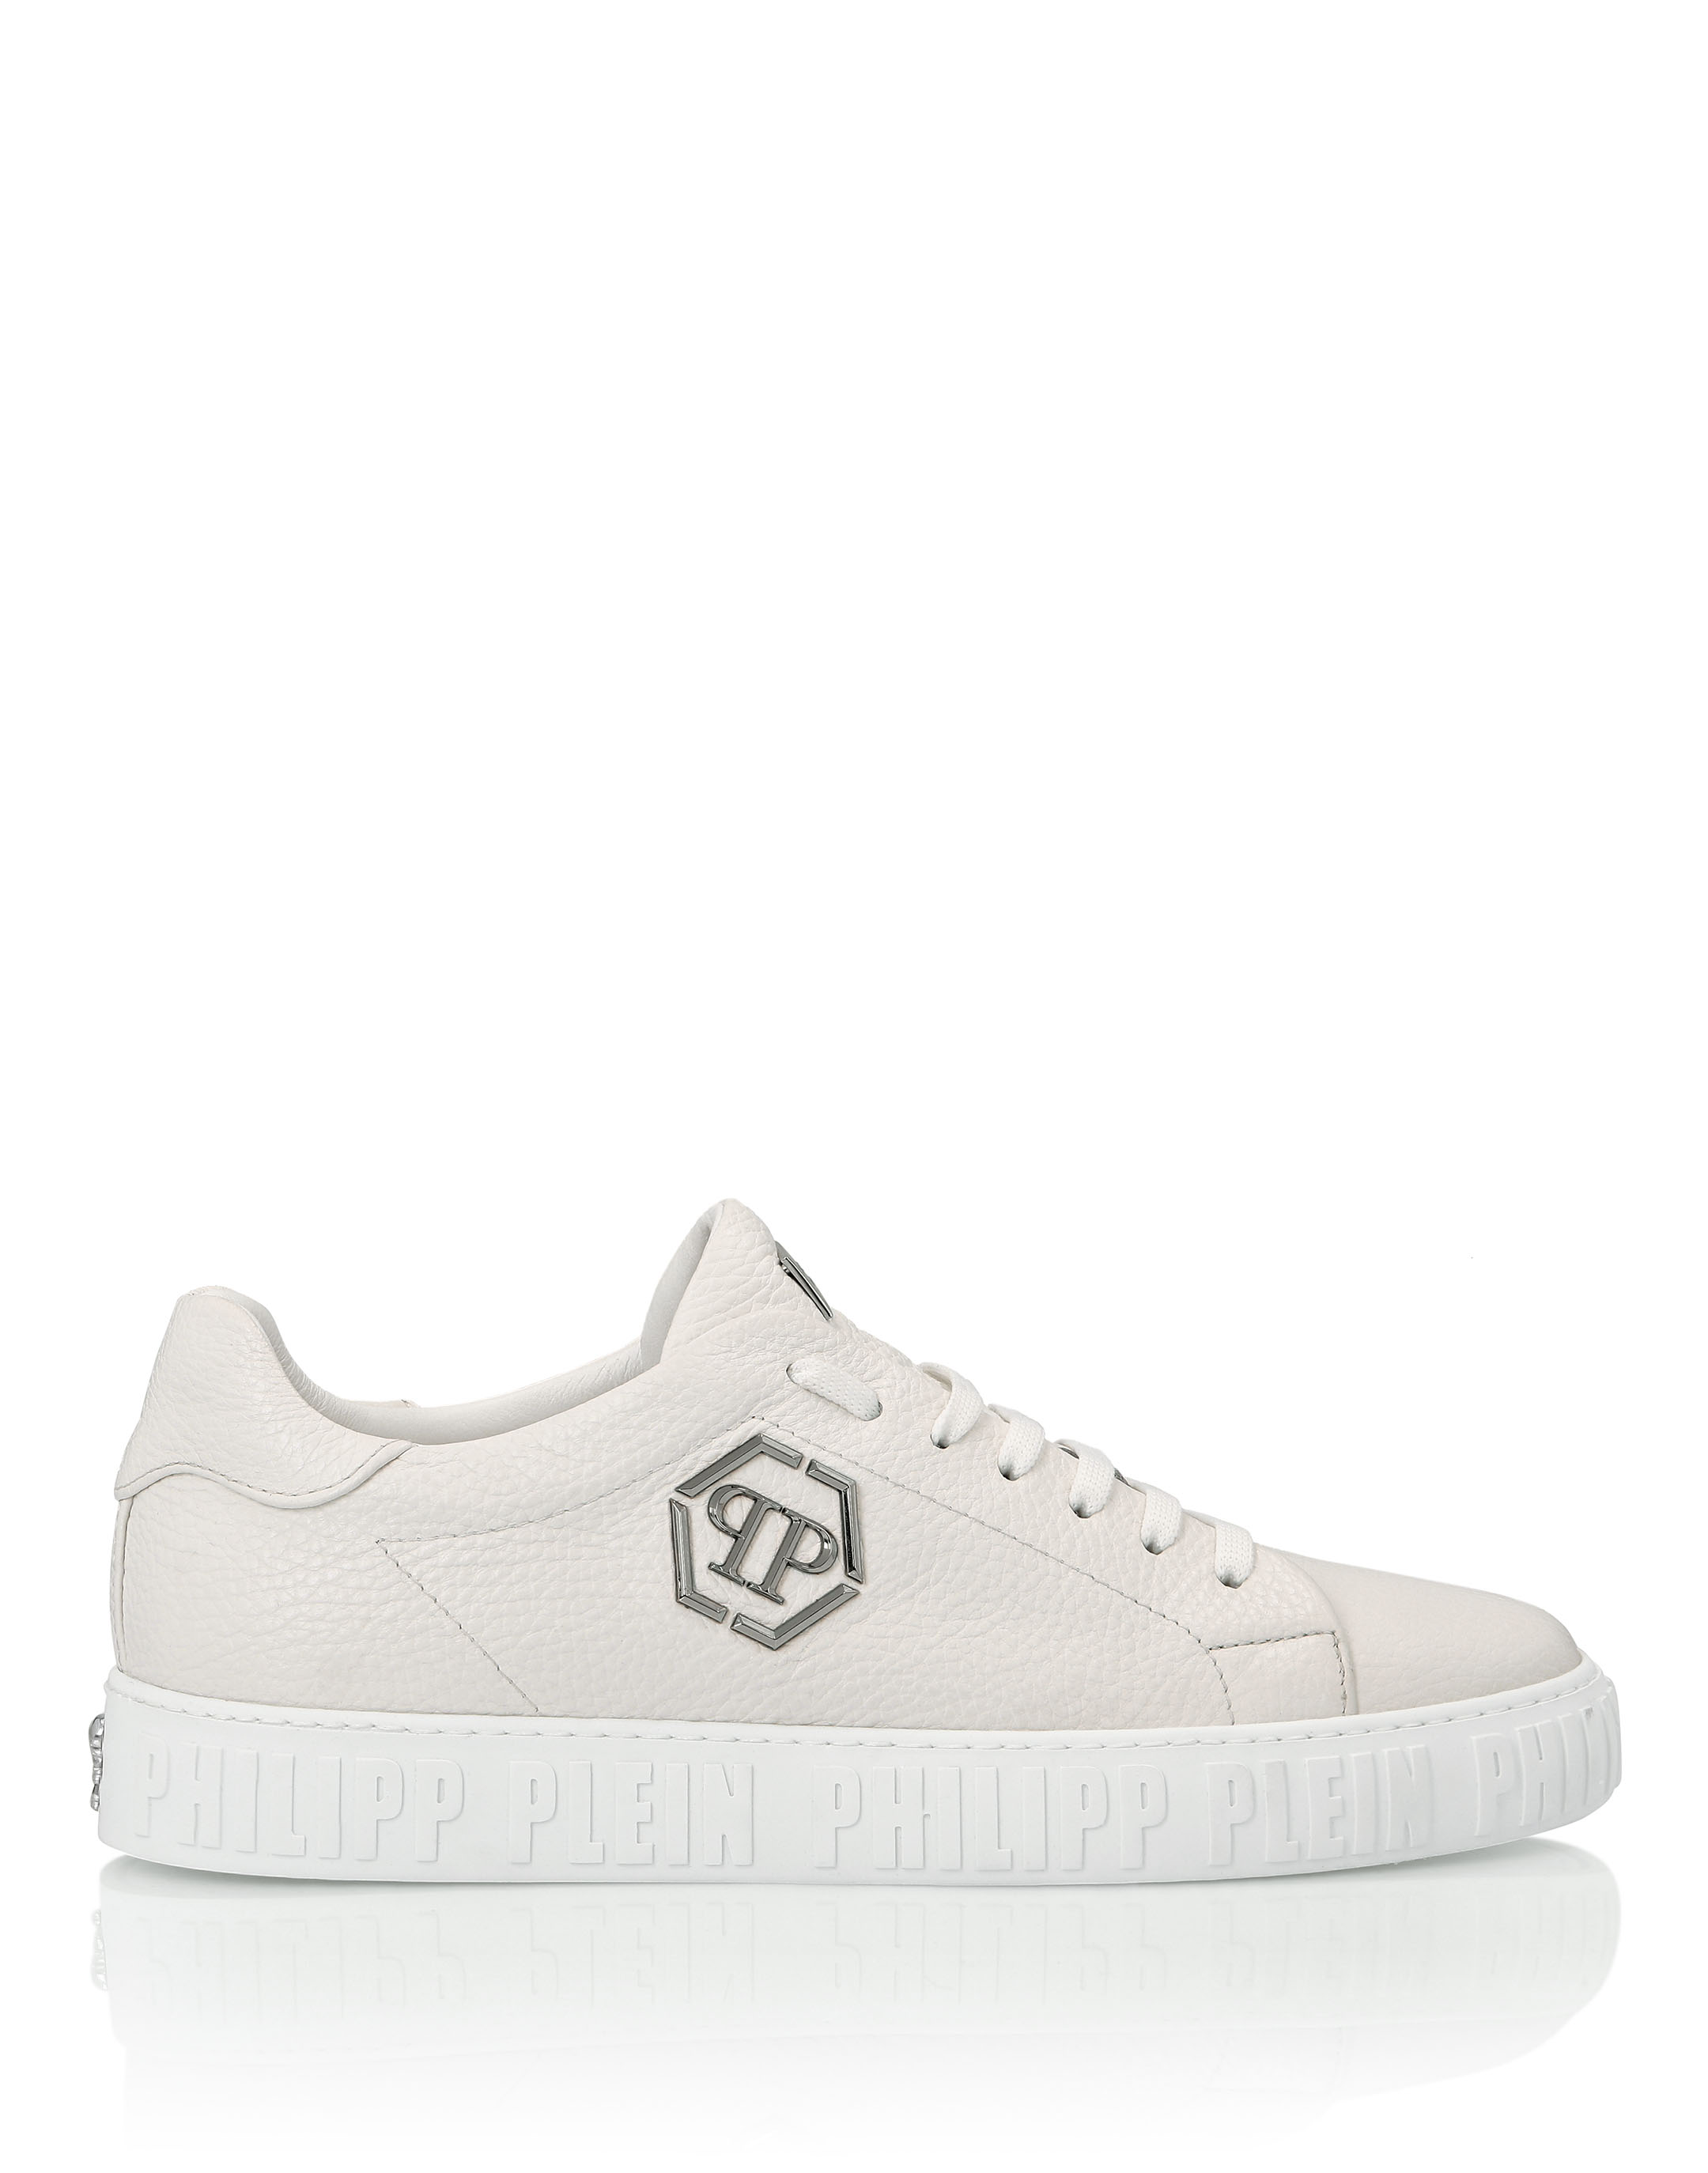 Lo-Top Sneakers All over PP | Philipp Plein Outlet